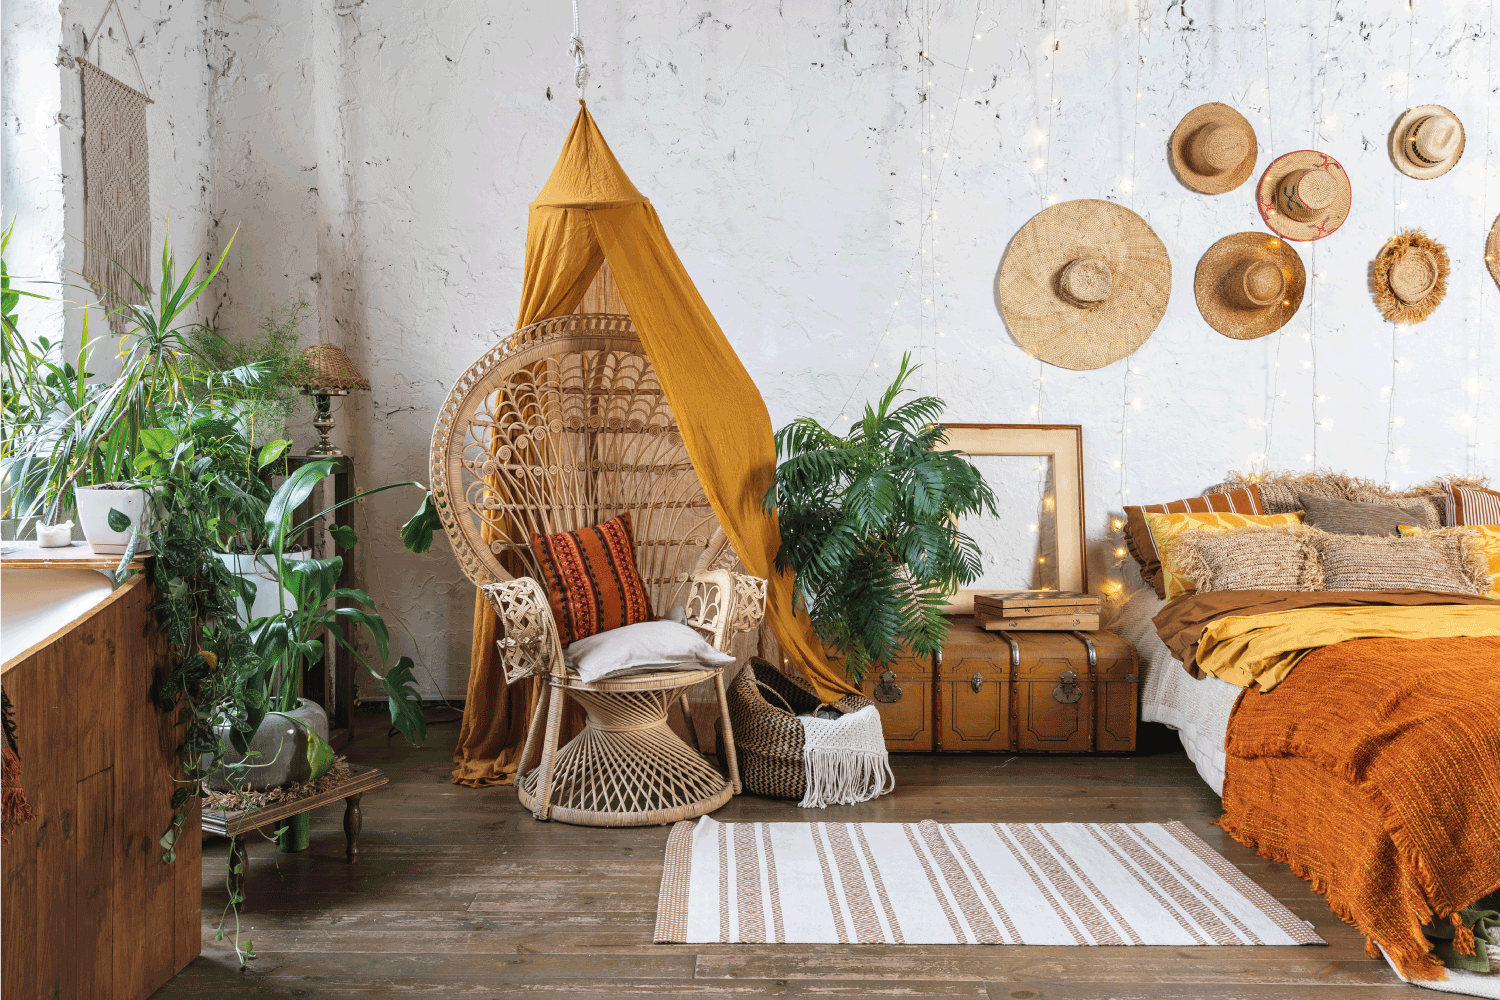 bohemian room with cozy interior, wicker chair, pillows, cushions, green plants, bed and rug on wooden floor. mustard accents